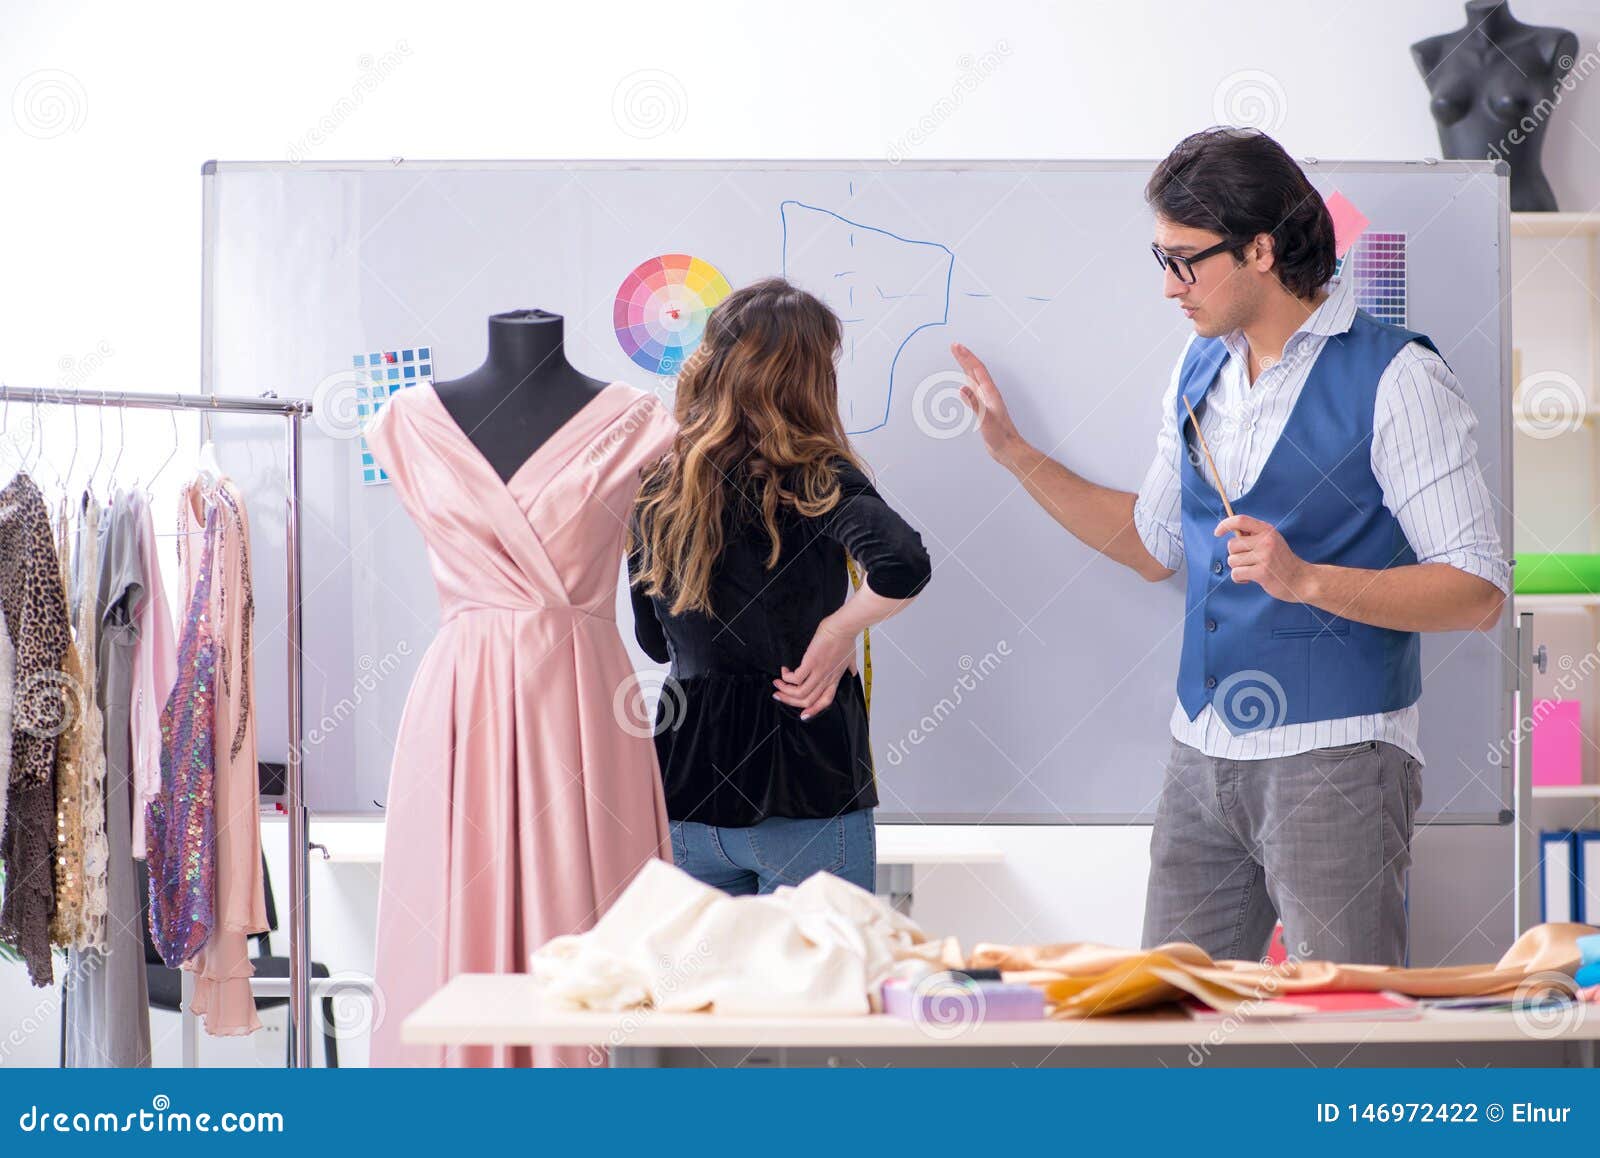 The Young Male Tailor Teaching Female Student Stock Photo - Image of ...